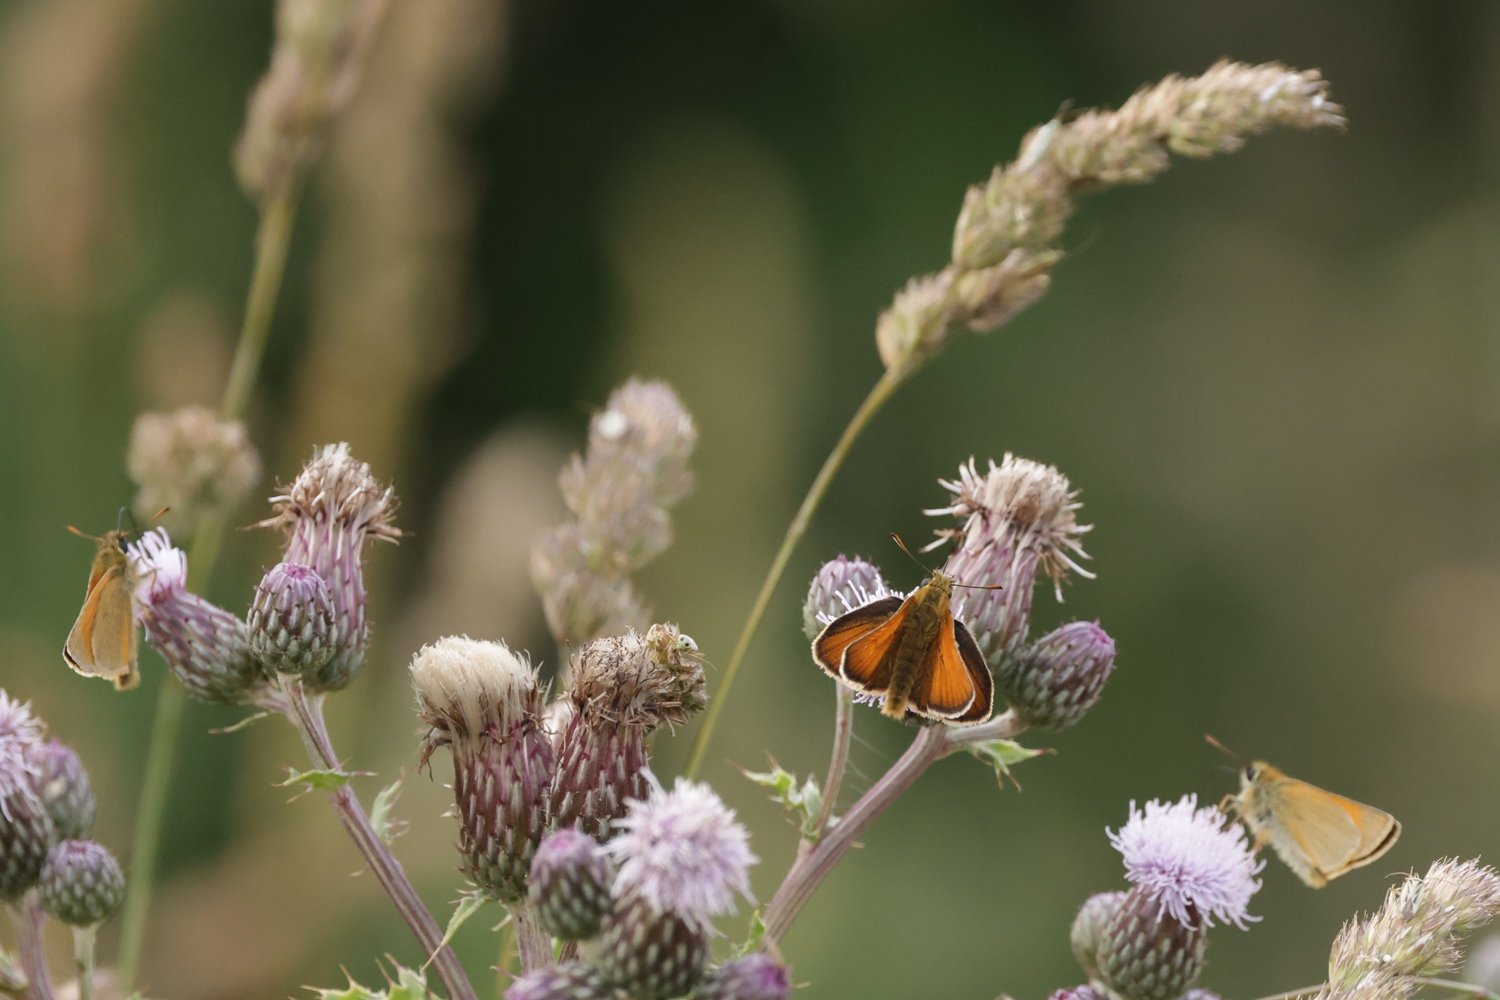 St Giles House England small skippers on thistle flowers.jpg